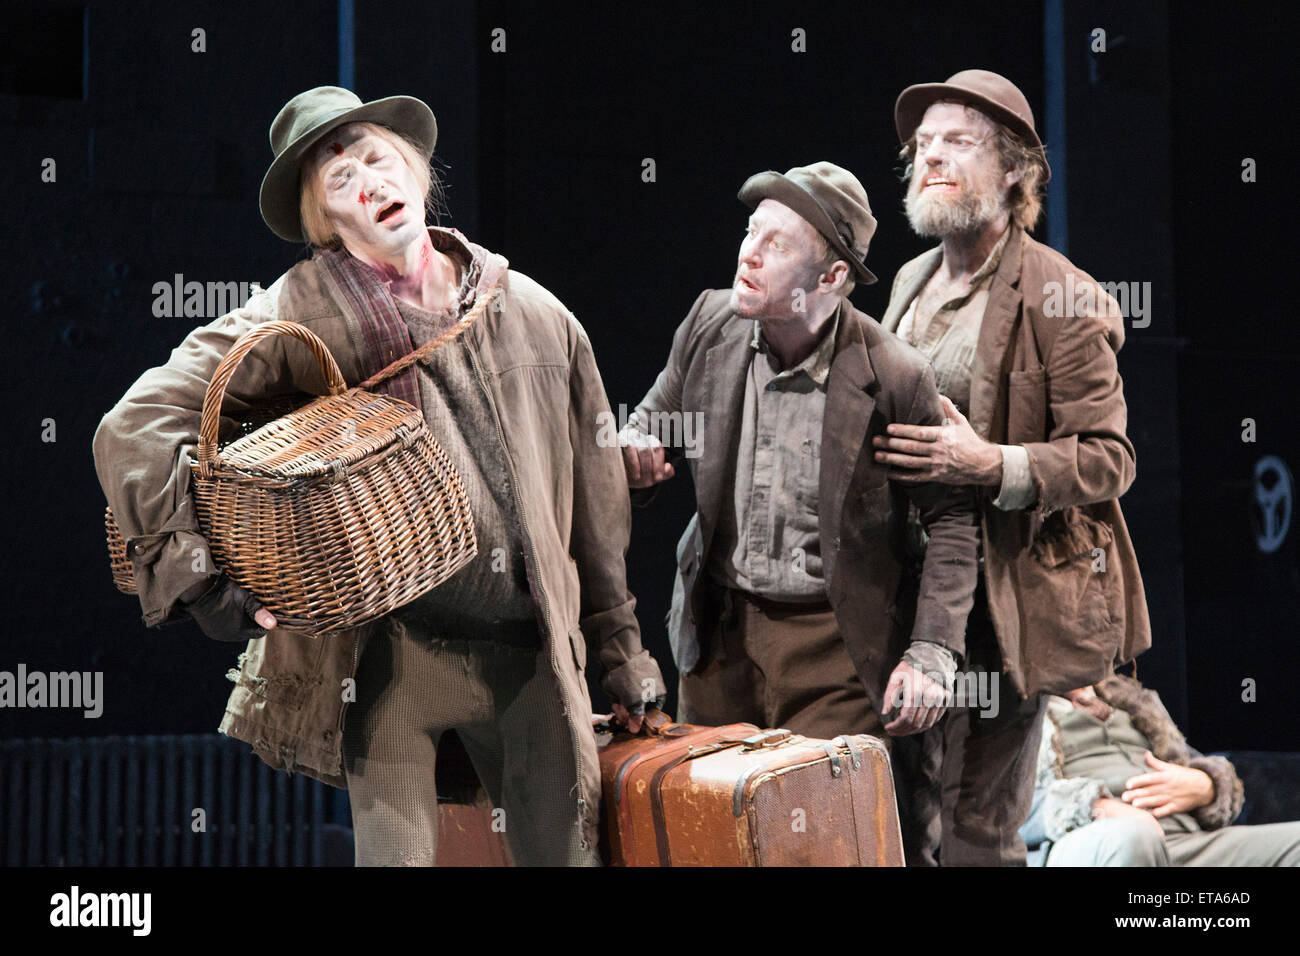 L-R: Luke Mullins as Lucky, Richard Rockburgh as Estragon and Hugo Weaving as Vladimir. Actors Richard Roxburgh and Hugo Weaving star in Samuel Beckett's 'Waiting for Godot' at the Barbican Theatre. Part of the International Beckett Season, this Sydney Theatre Company play is directed by Andrew Upton. With Luke Mullins as Luke, Philip Quast as Pozzo, Richard Roxburgh as Estragon and Hugo Weaving as Vladimir. Performances from 4 to 13 June 2015 at the Barbican Theatre. Stock Photo